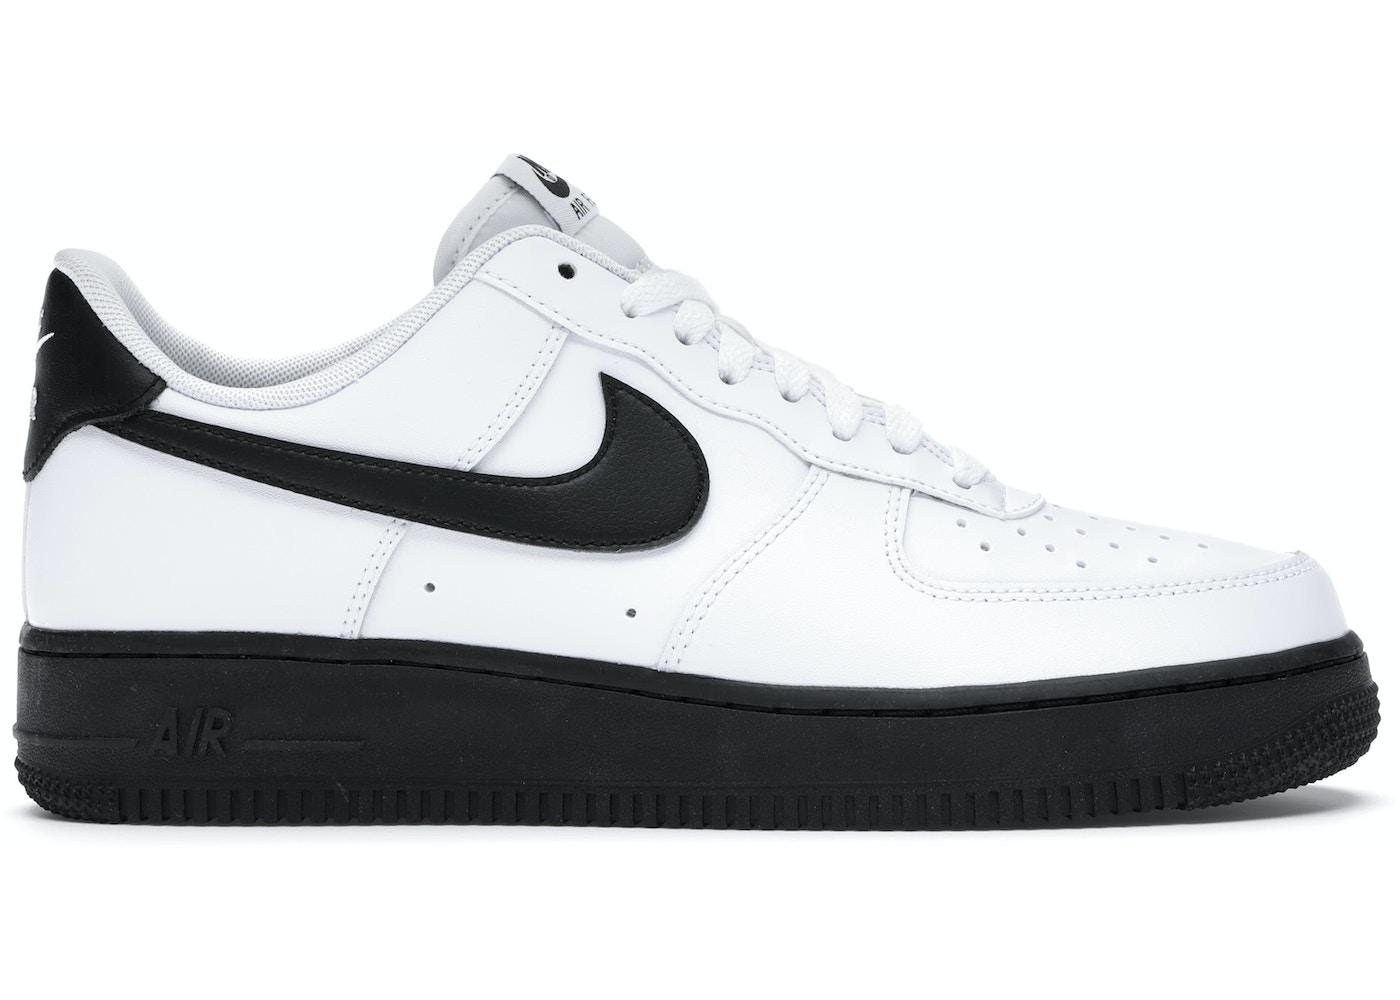 Nike Air Force 1 Low White Black Midsole - CK7663-101